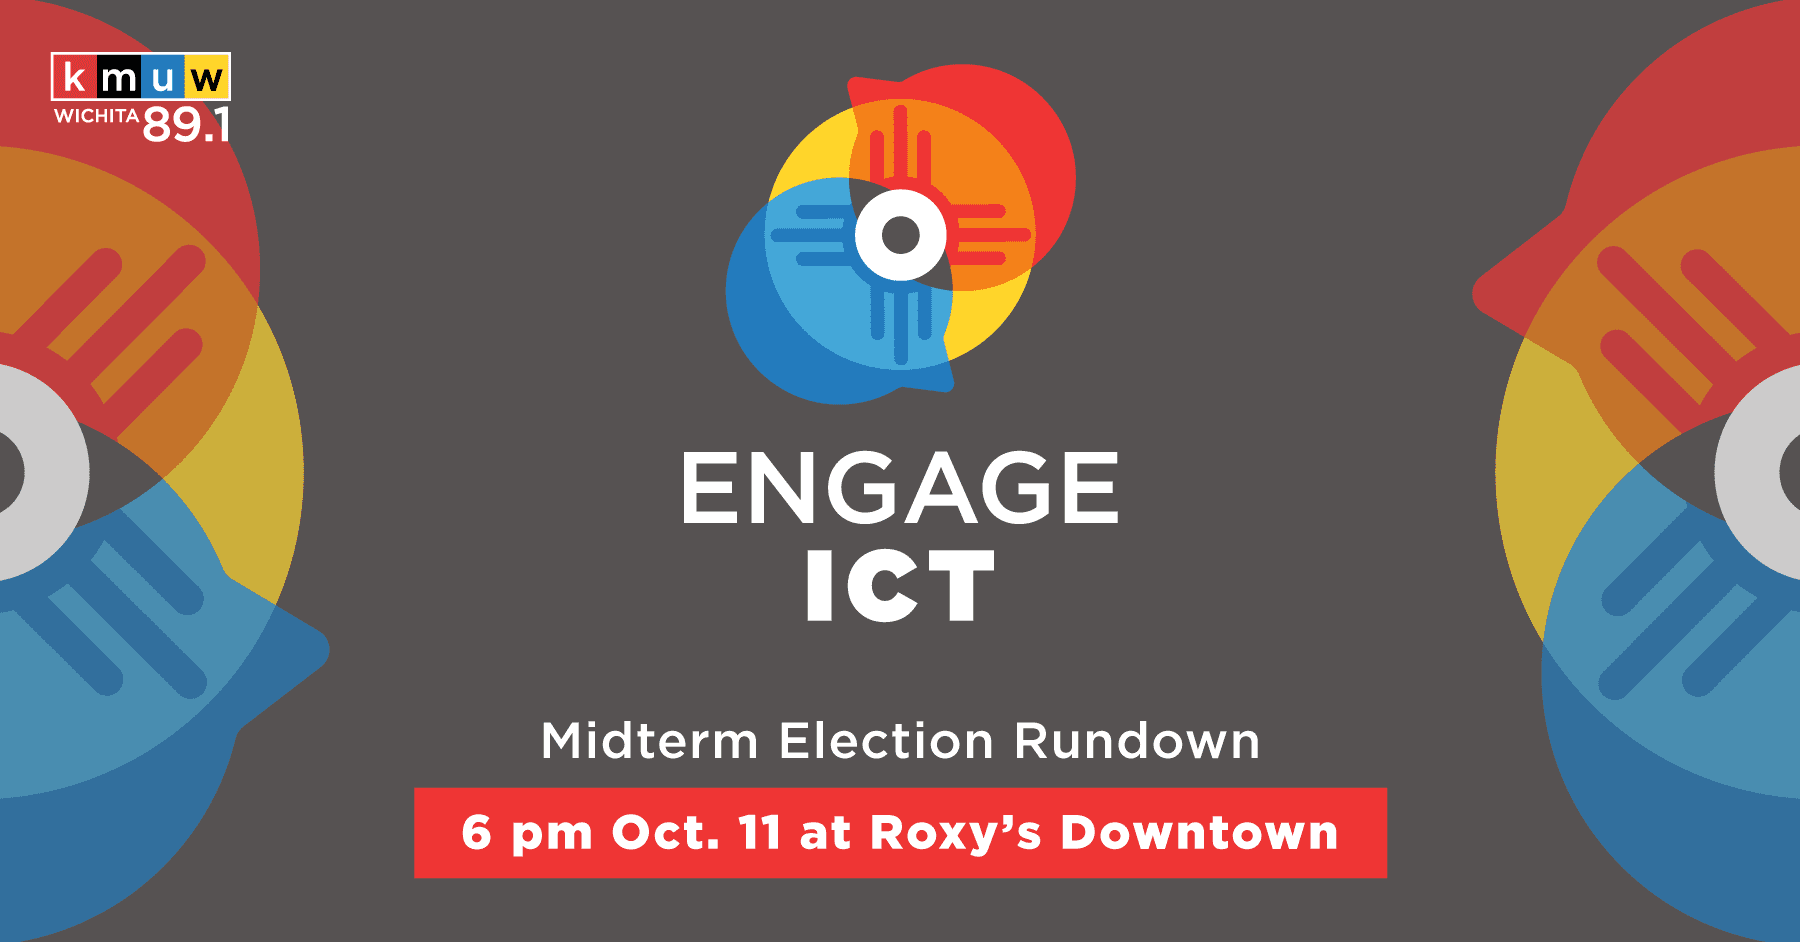 Engage ICT. Midterm Election Rundown. 6:00 p.m. Oct. 11 at Roxy's Downtown.